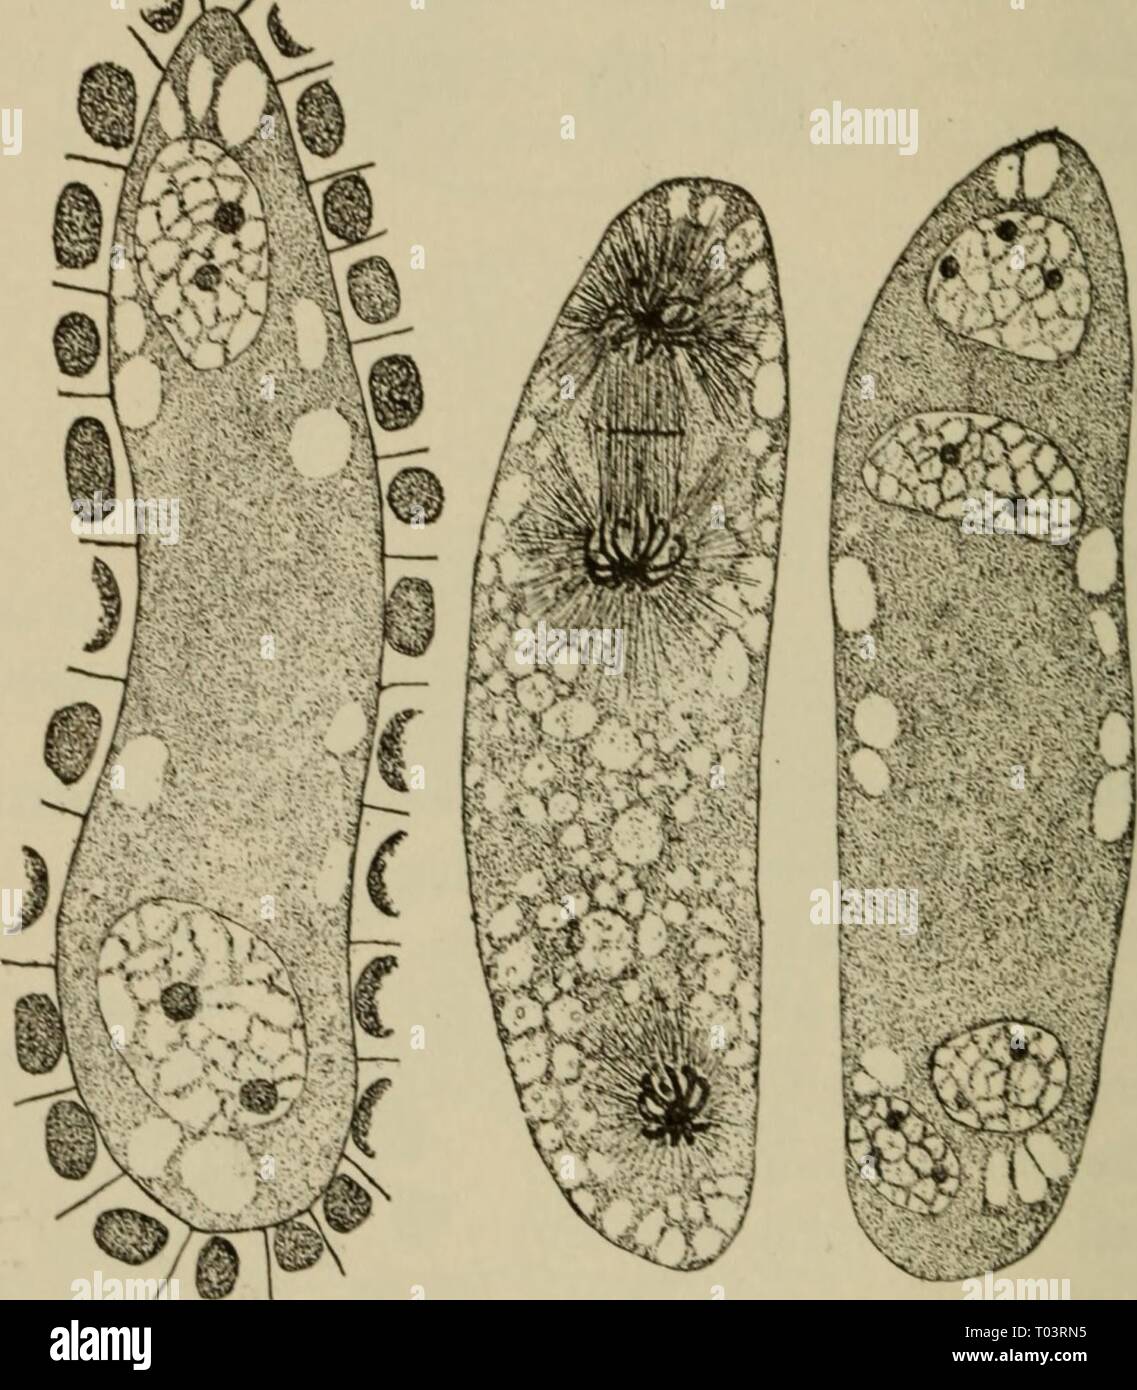 Elementary botany . elementarybotany00atki Year: 1898  MORPHOLOGY. size of the female nucleus before the fusion of the two takes place. In figs. 306 and 307 are shown the entering pollen tube with the sperm nucleus, and the fusion of the male and female nuclei. 457. Fertilization in plants is fundamentally the same as in animals.—In all the great groups of plants as represented by spirogyra, oedogonium, vaucheria, peronospora, ferns, gymno-    Fig. 304, Two- ami four-celled stage of embryo-sac of lilium. The middle one shows di ision nuclei to form the four-celled stage. (.Easter lily.) sperm Stock Photo